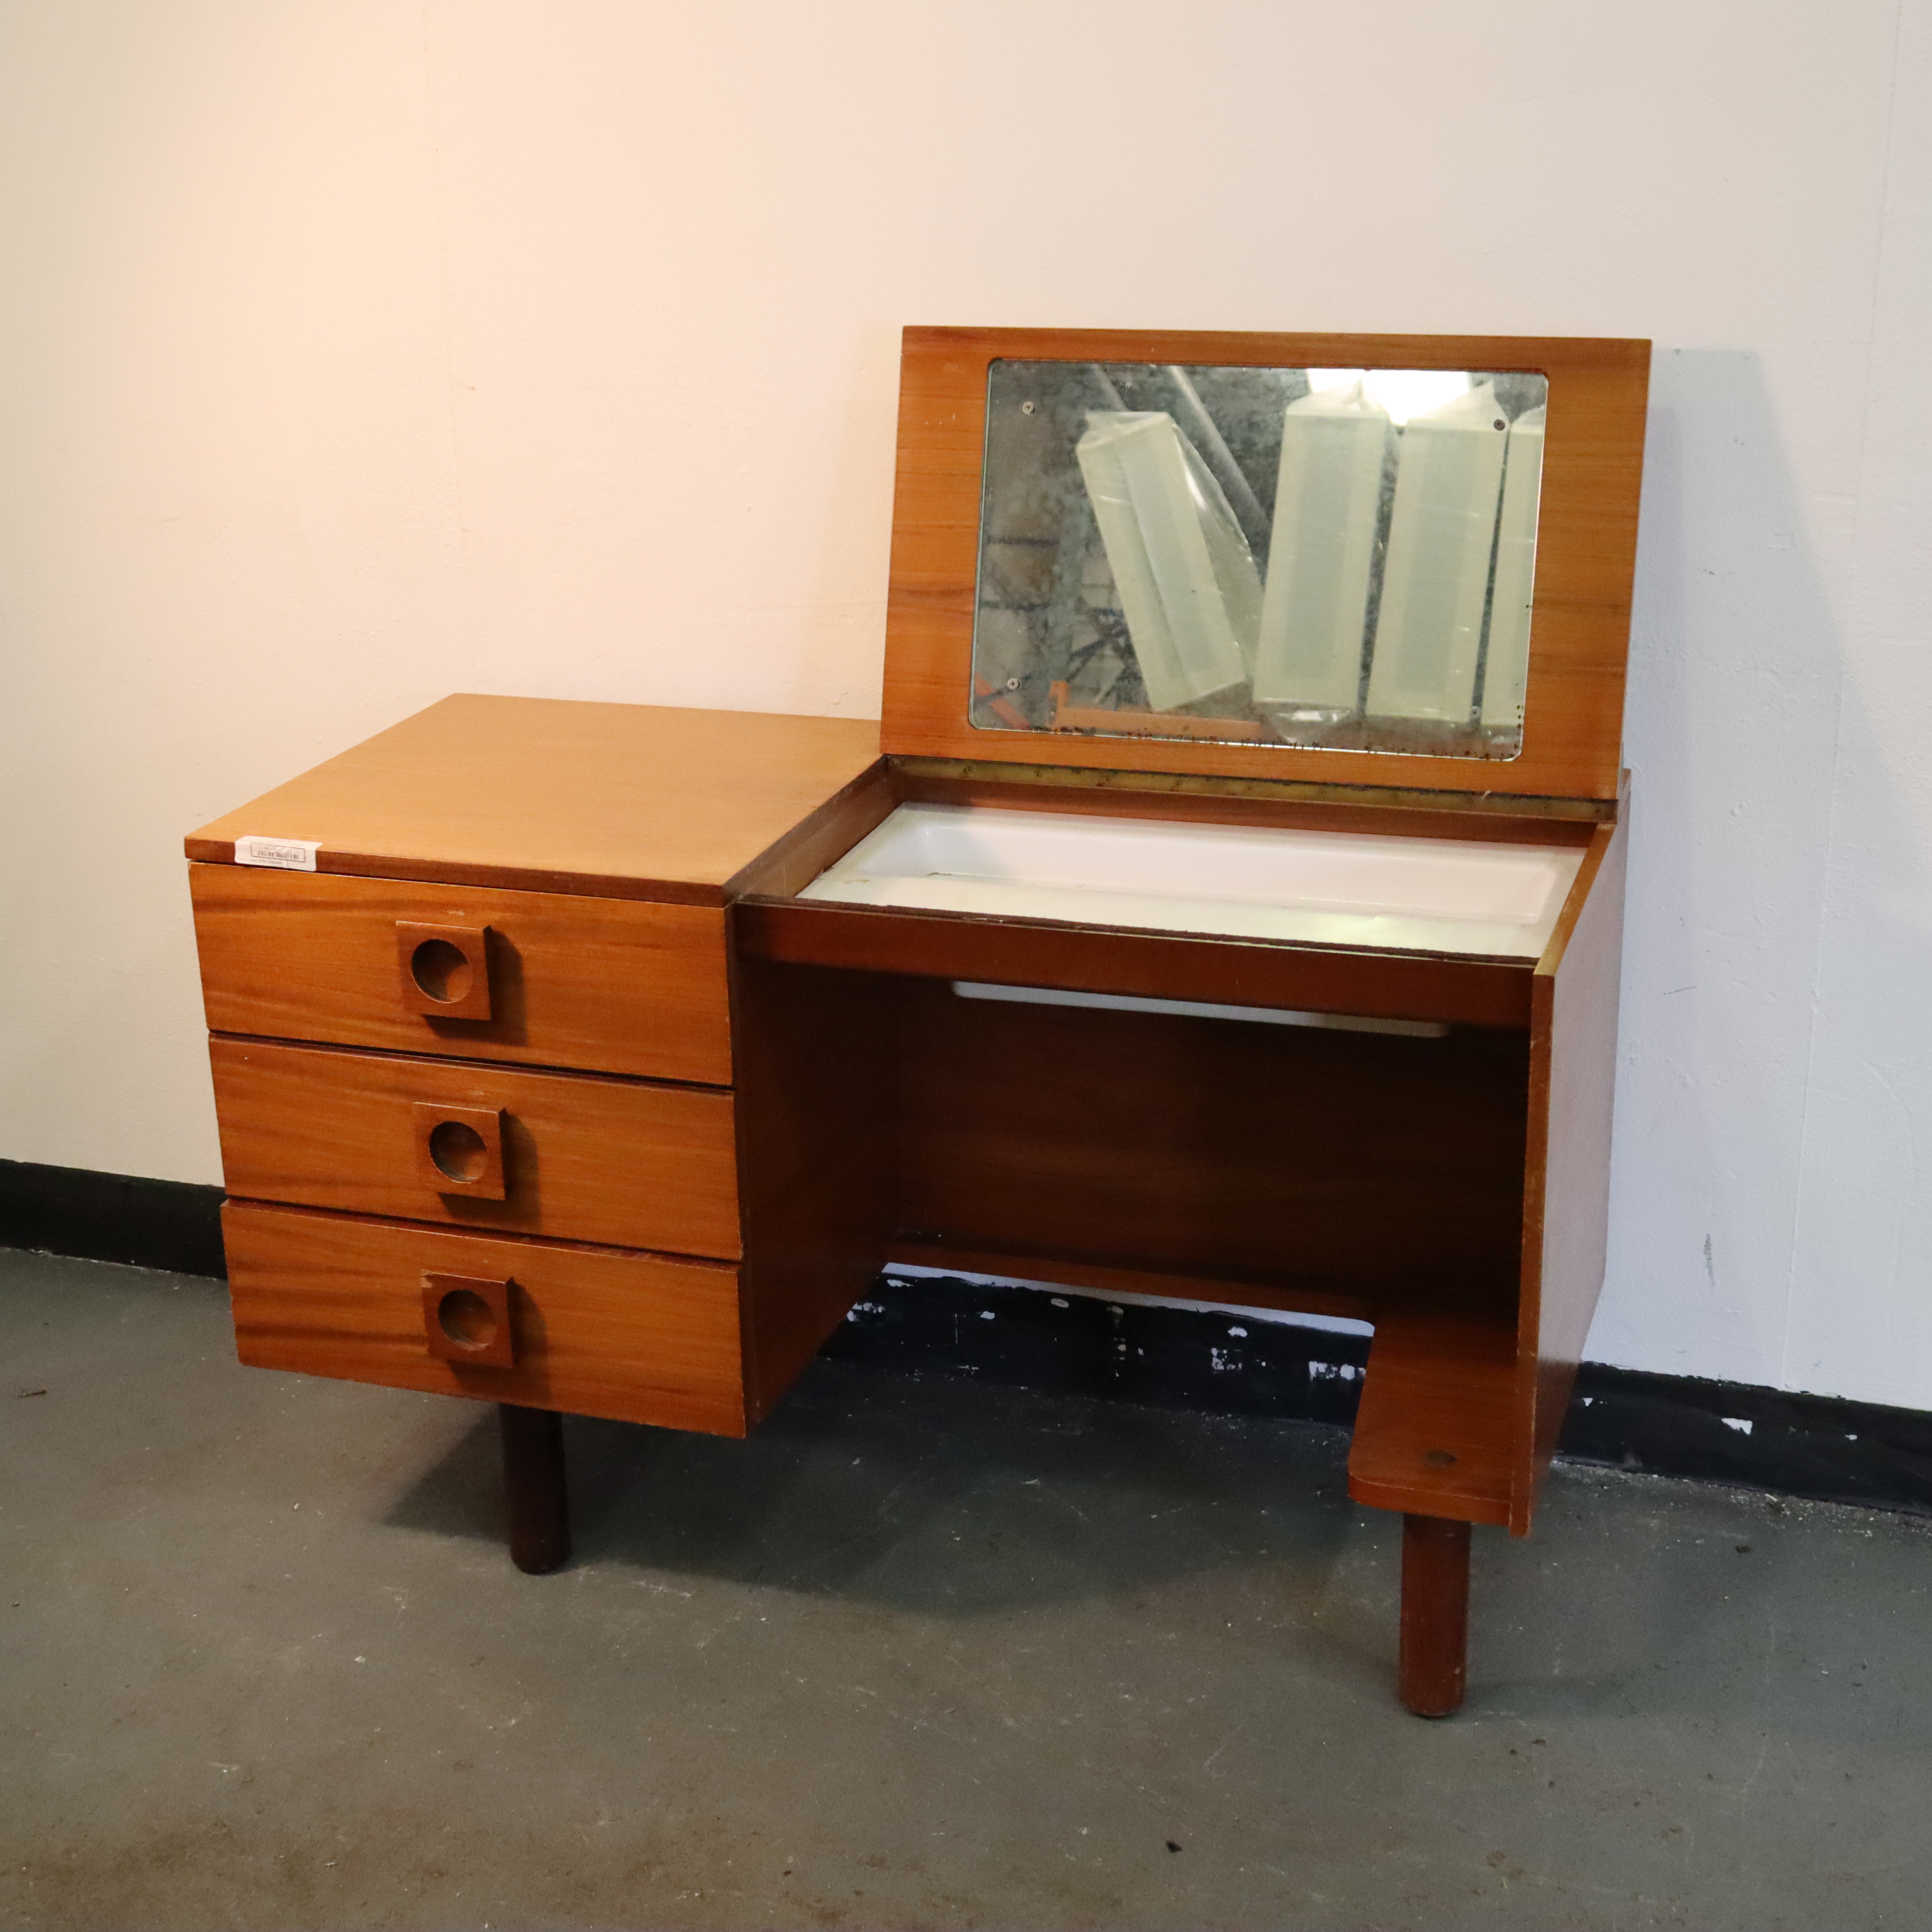 Retro Desk With Drawers